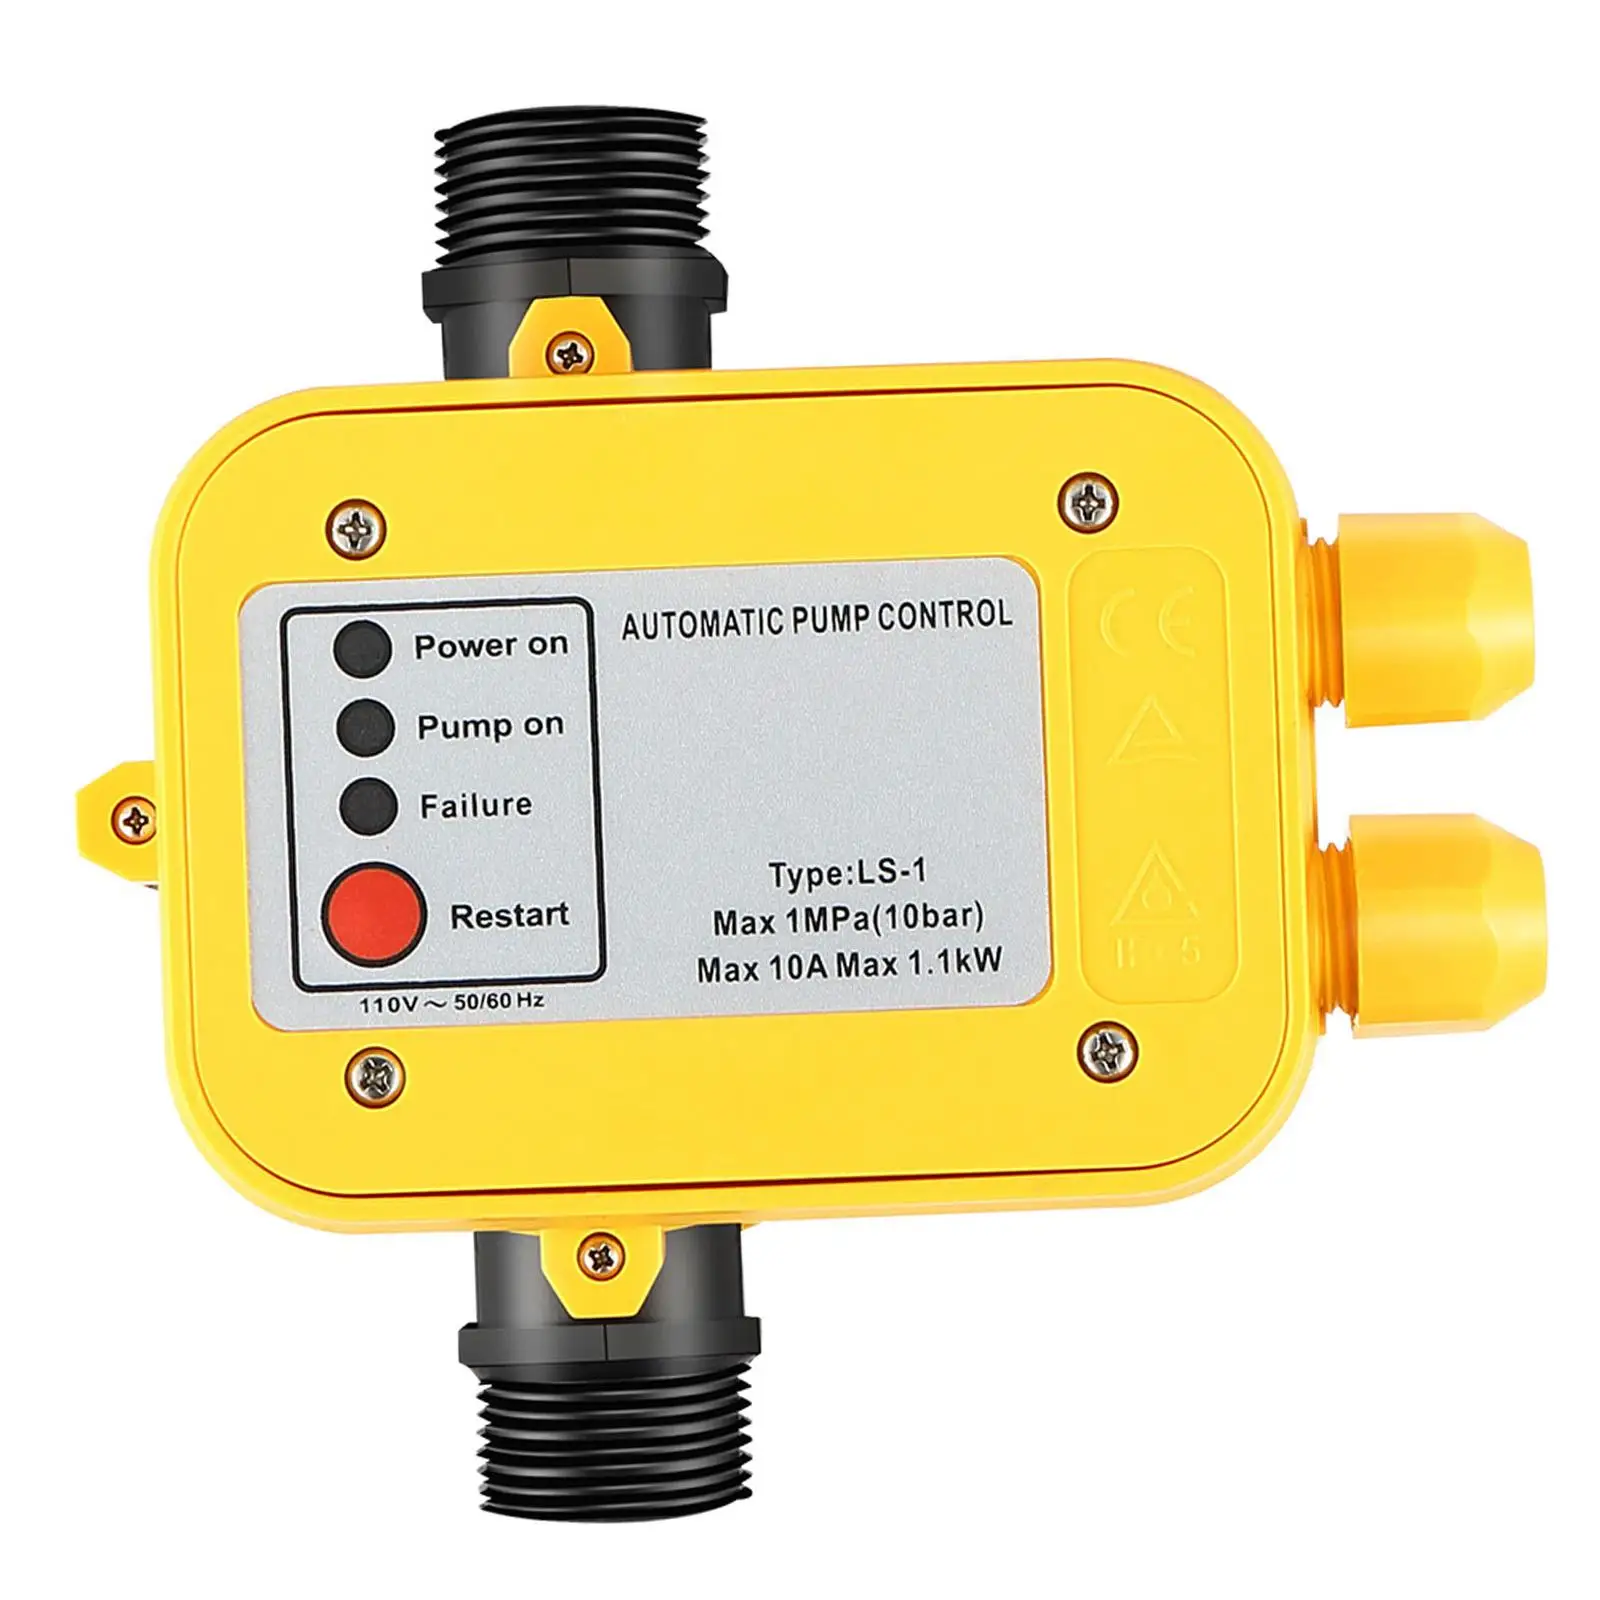 Automatic Water Pump Pressure Controller Protection Gardening Control Water Pressure Switch Waterproof 50/60Hz 1.1kW